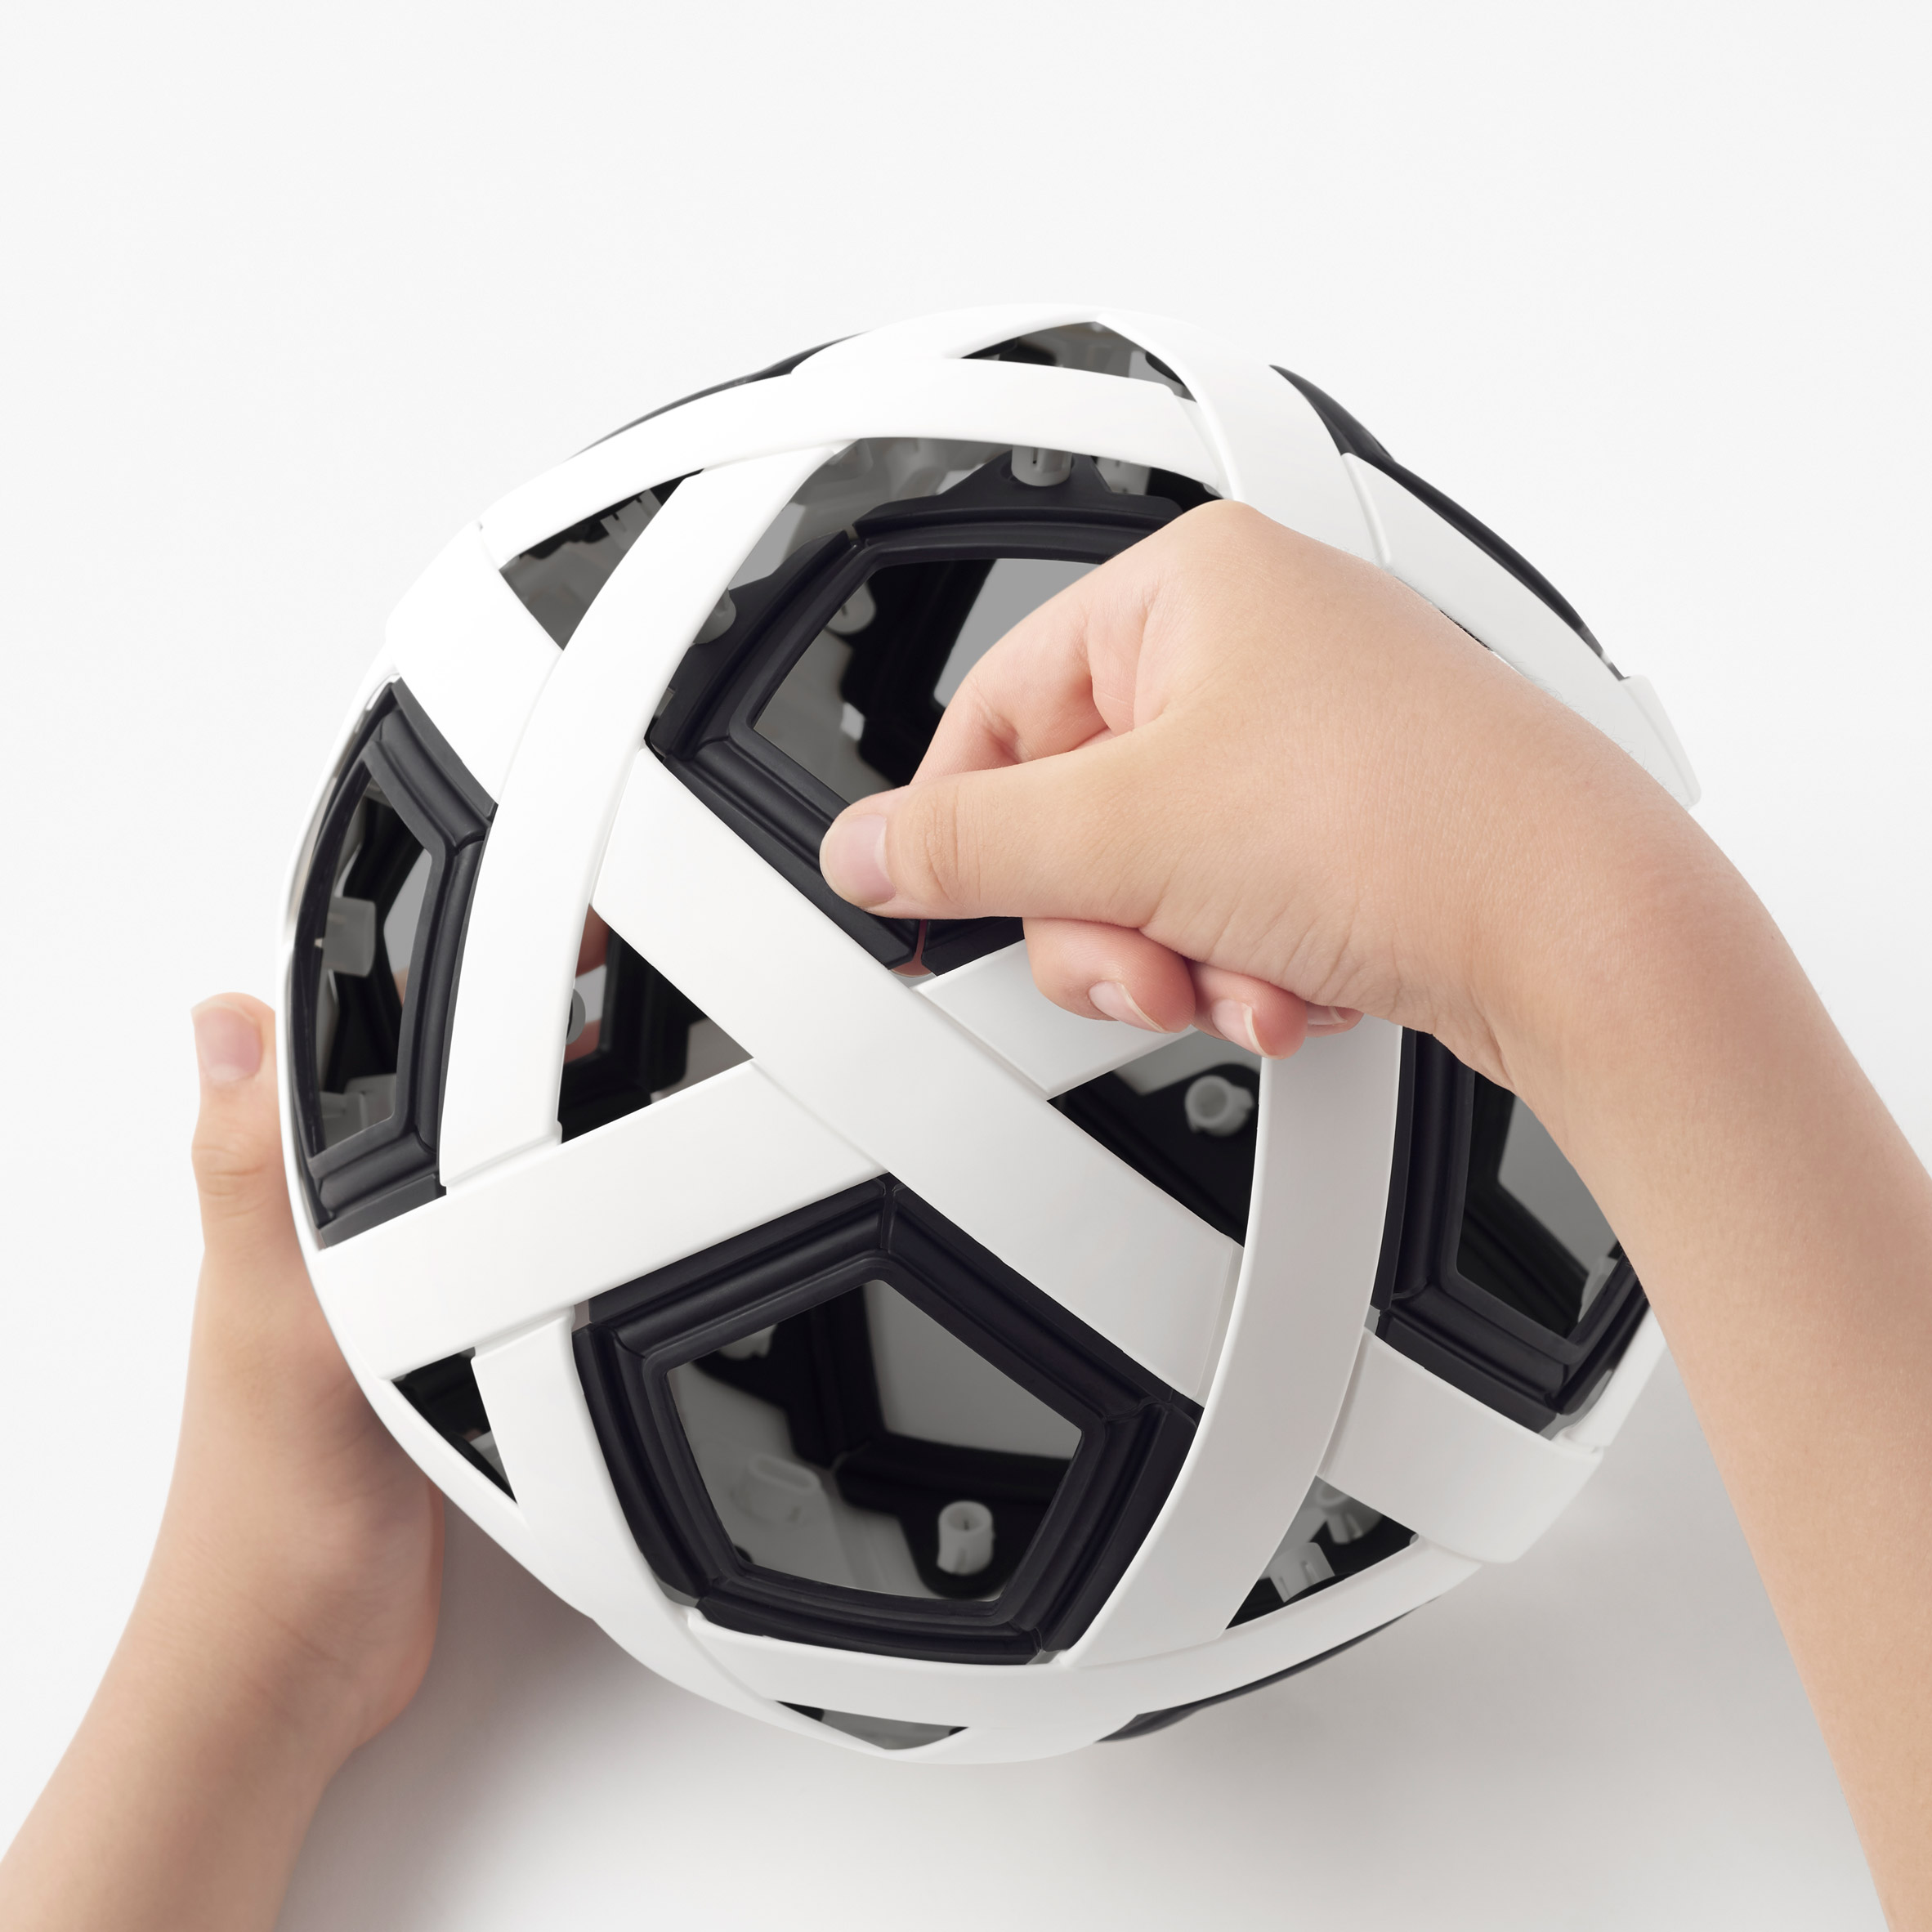 My Football Kit by Nendo for Molten